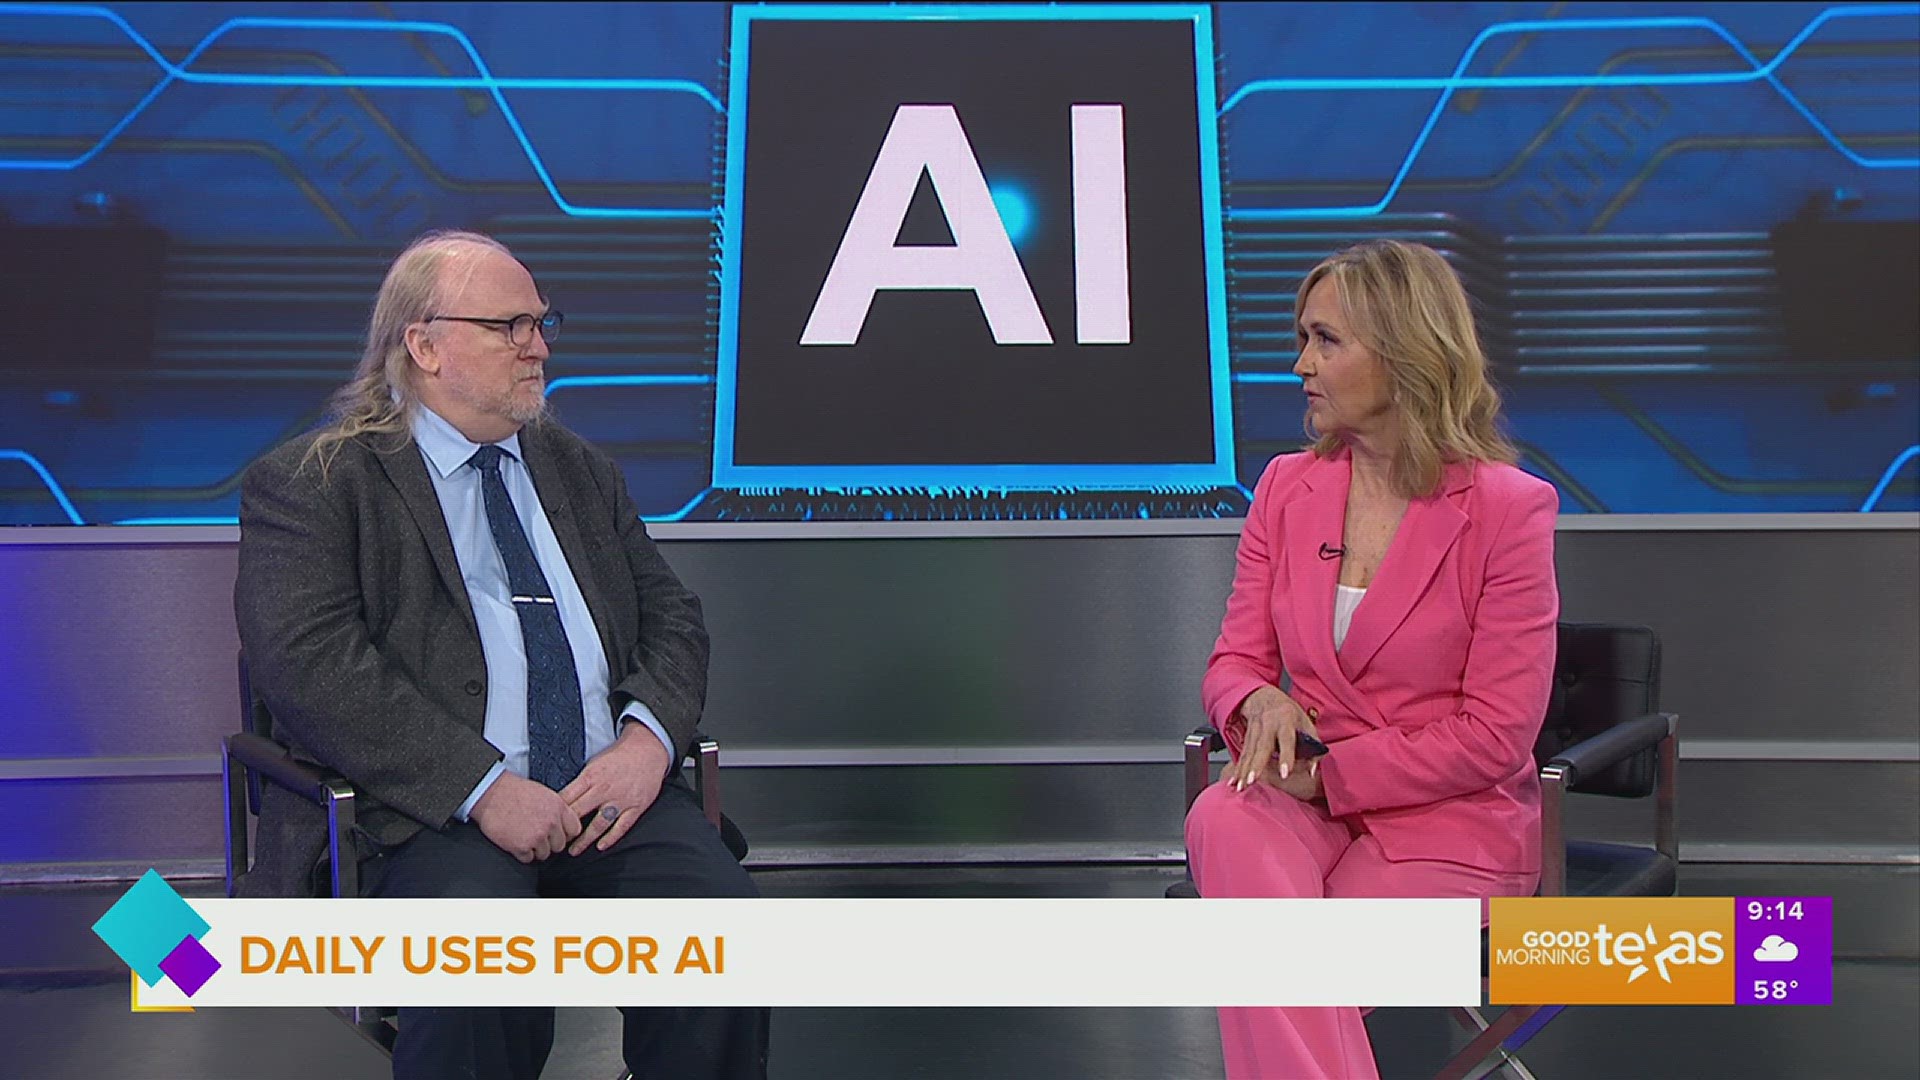 Dale MacDonald with the University of Texas at Dallas shares how you can use AI in your daily life.